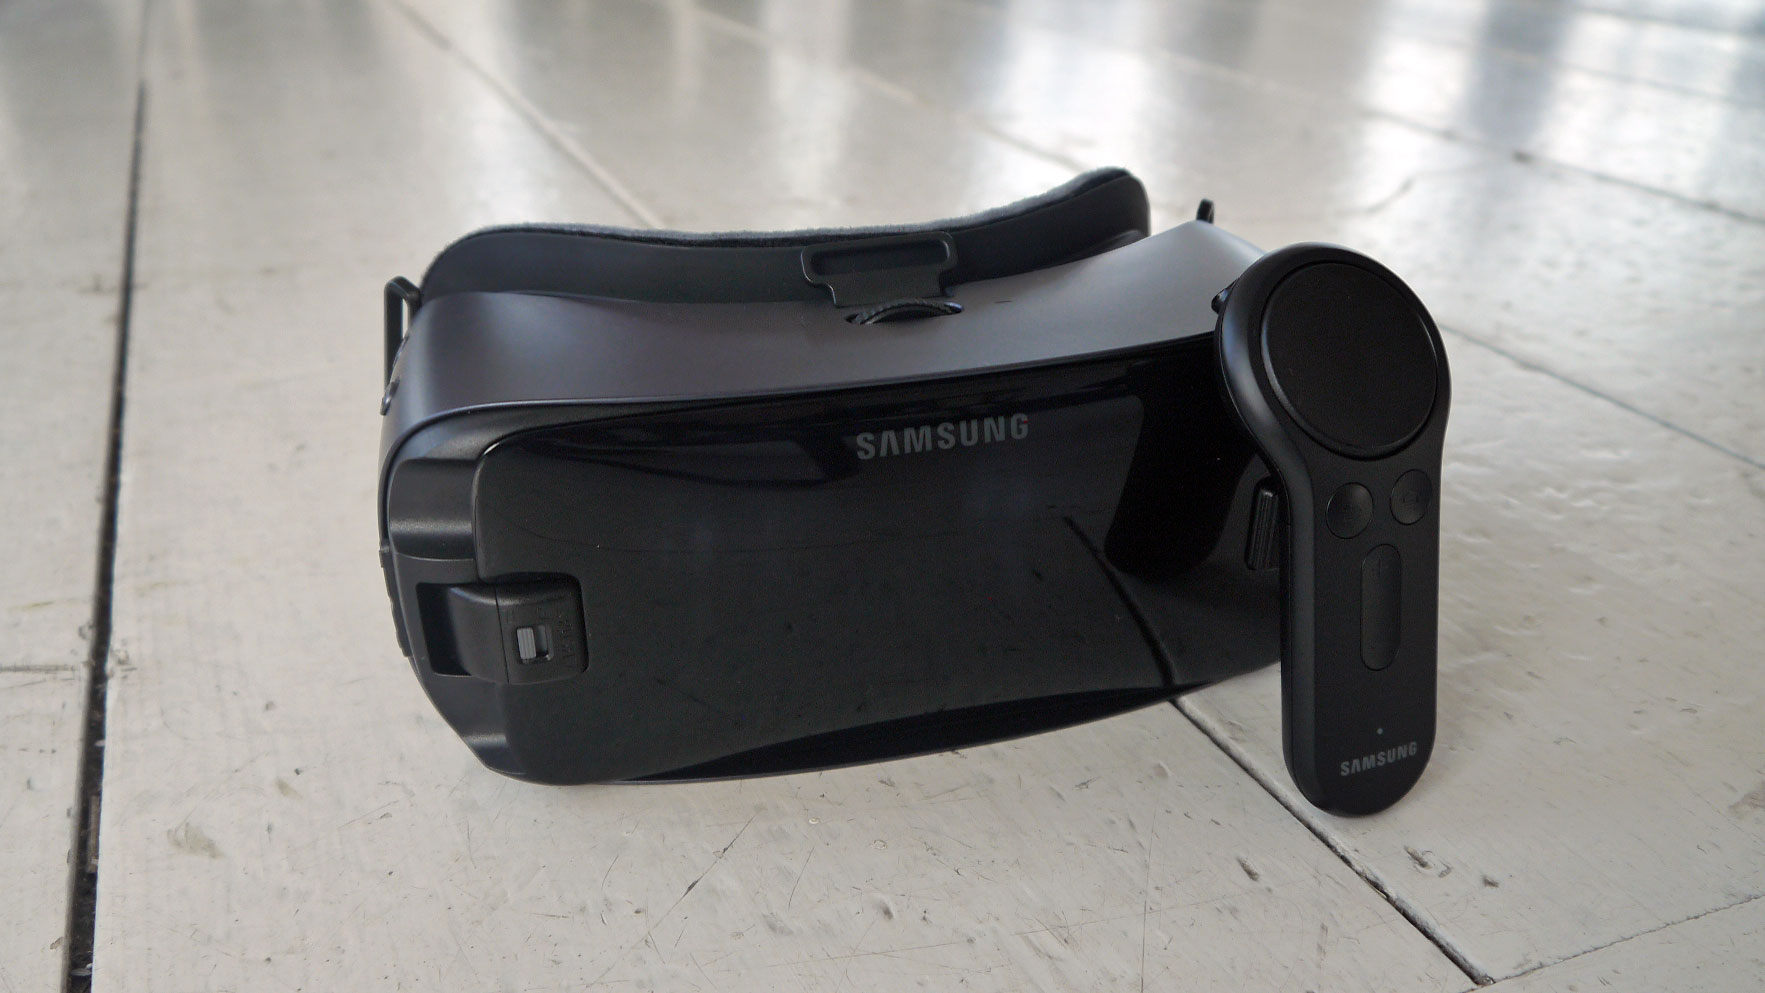 The Samsung Gear Vr and controller